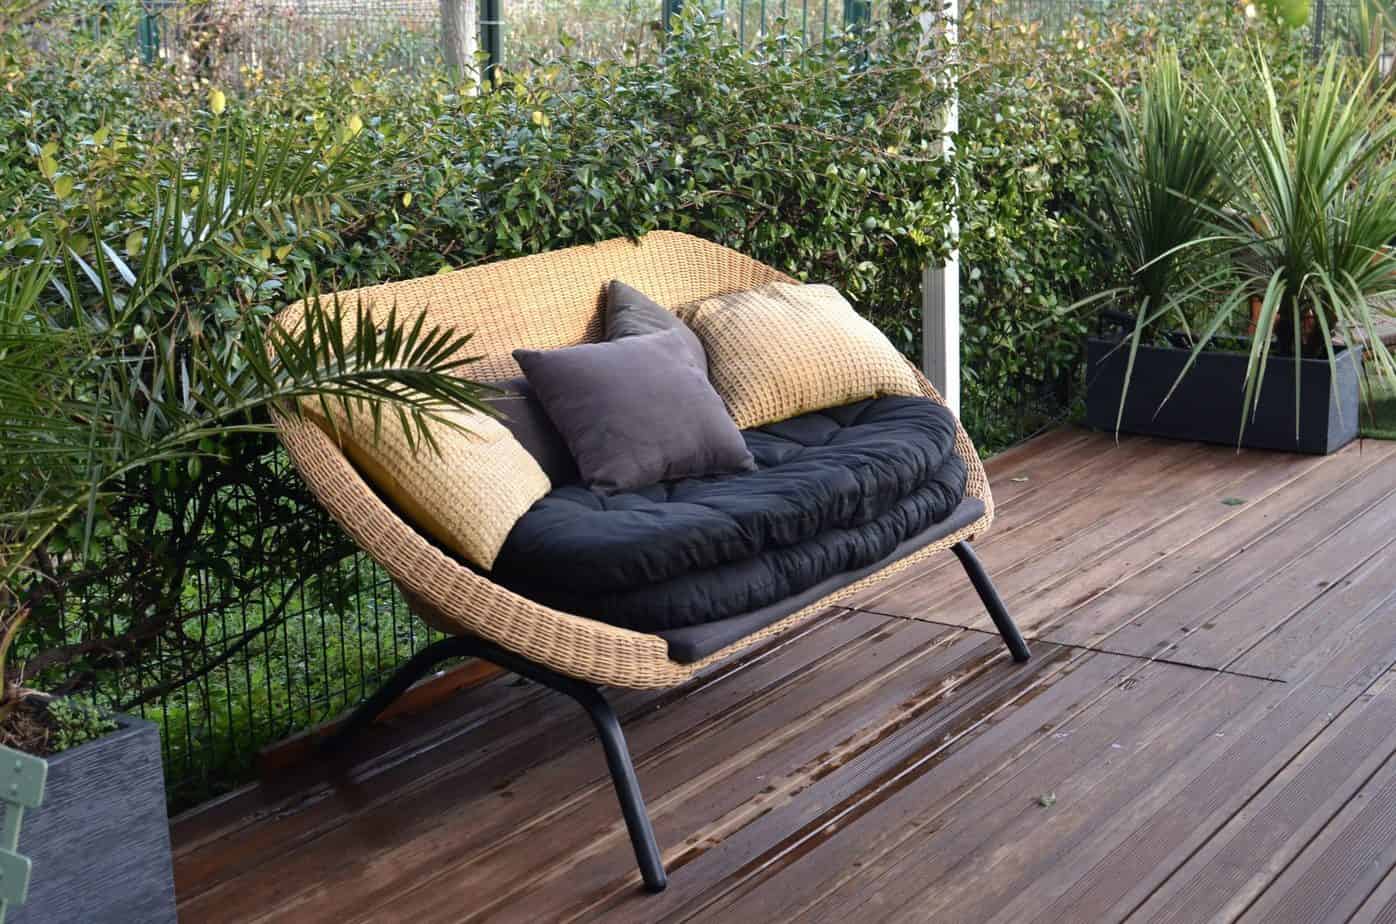 How to care for garden furniture made of rattan? Cleaning and care